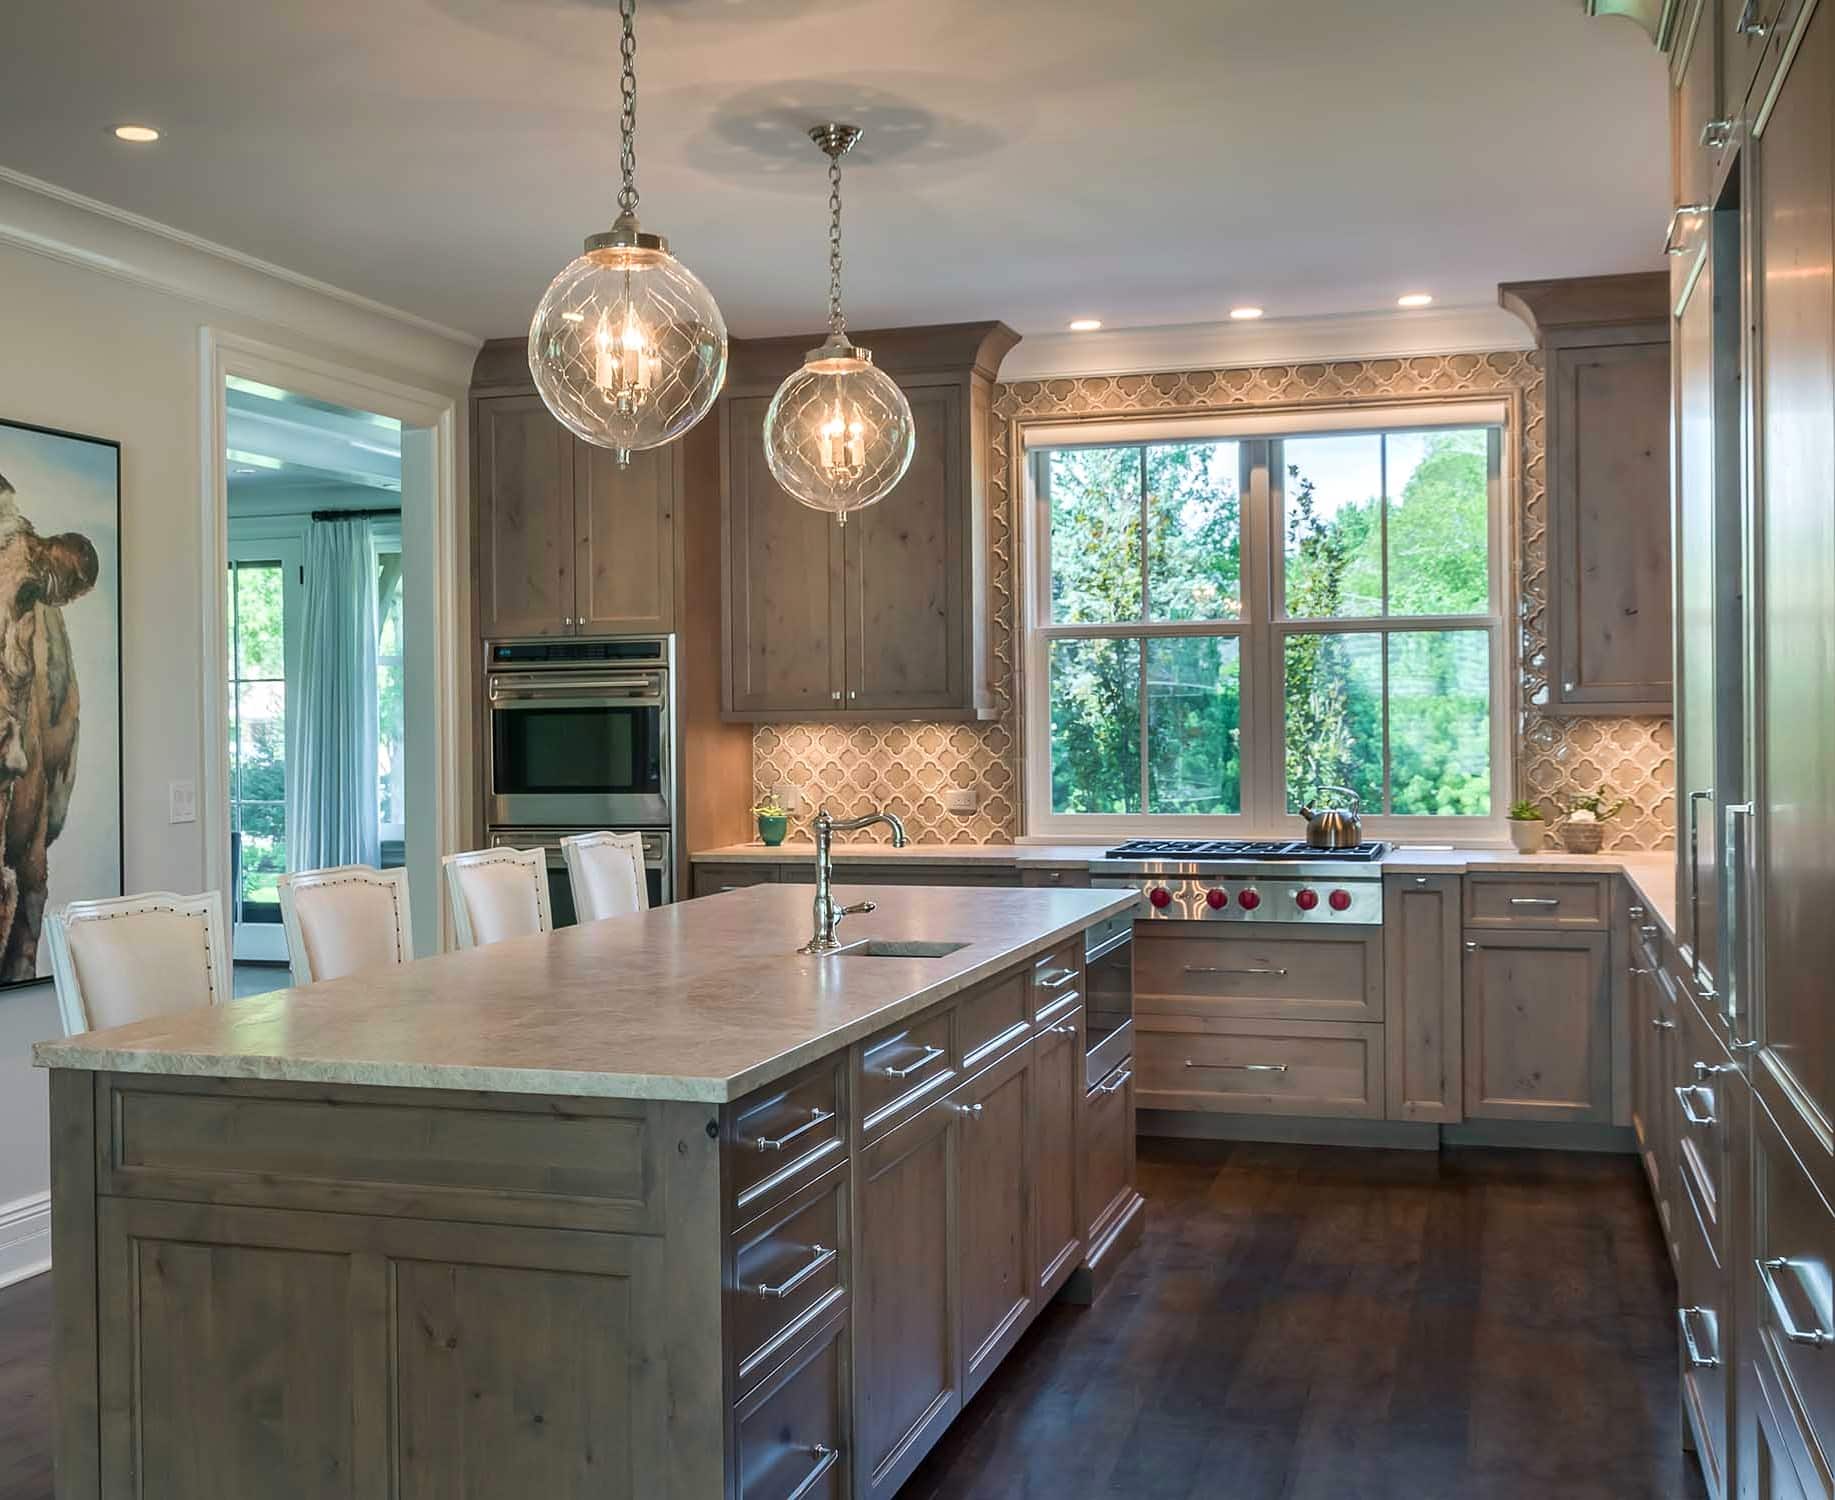 Northbrook rustic chic kitchen with light brown cabinets and eat-in island